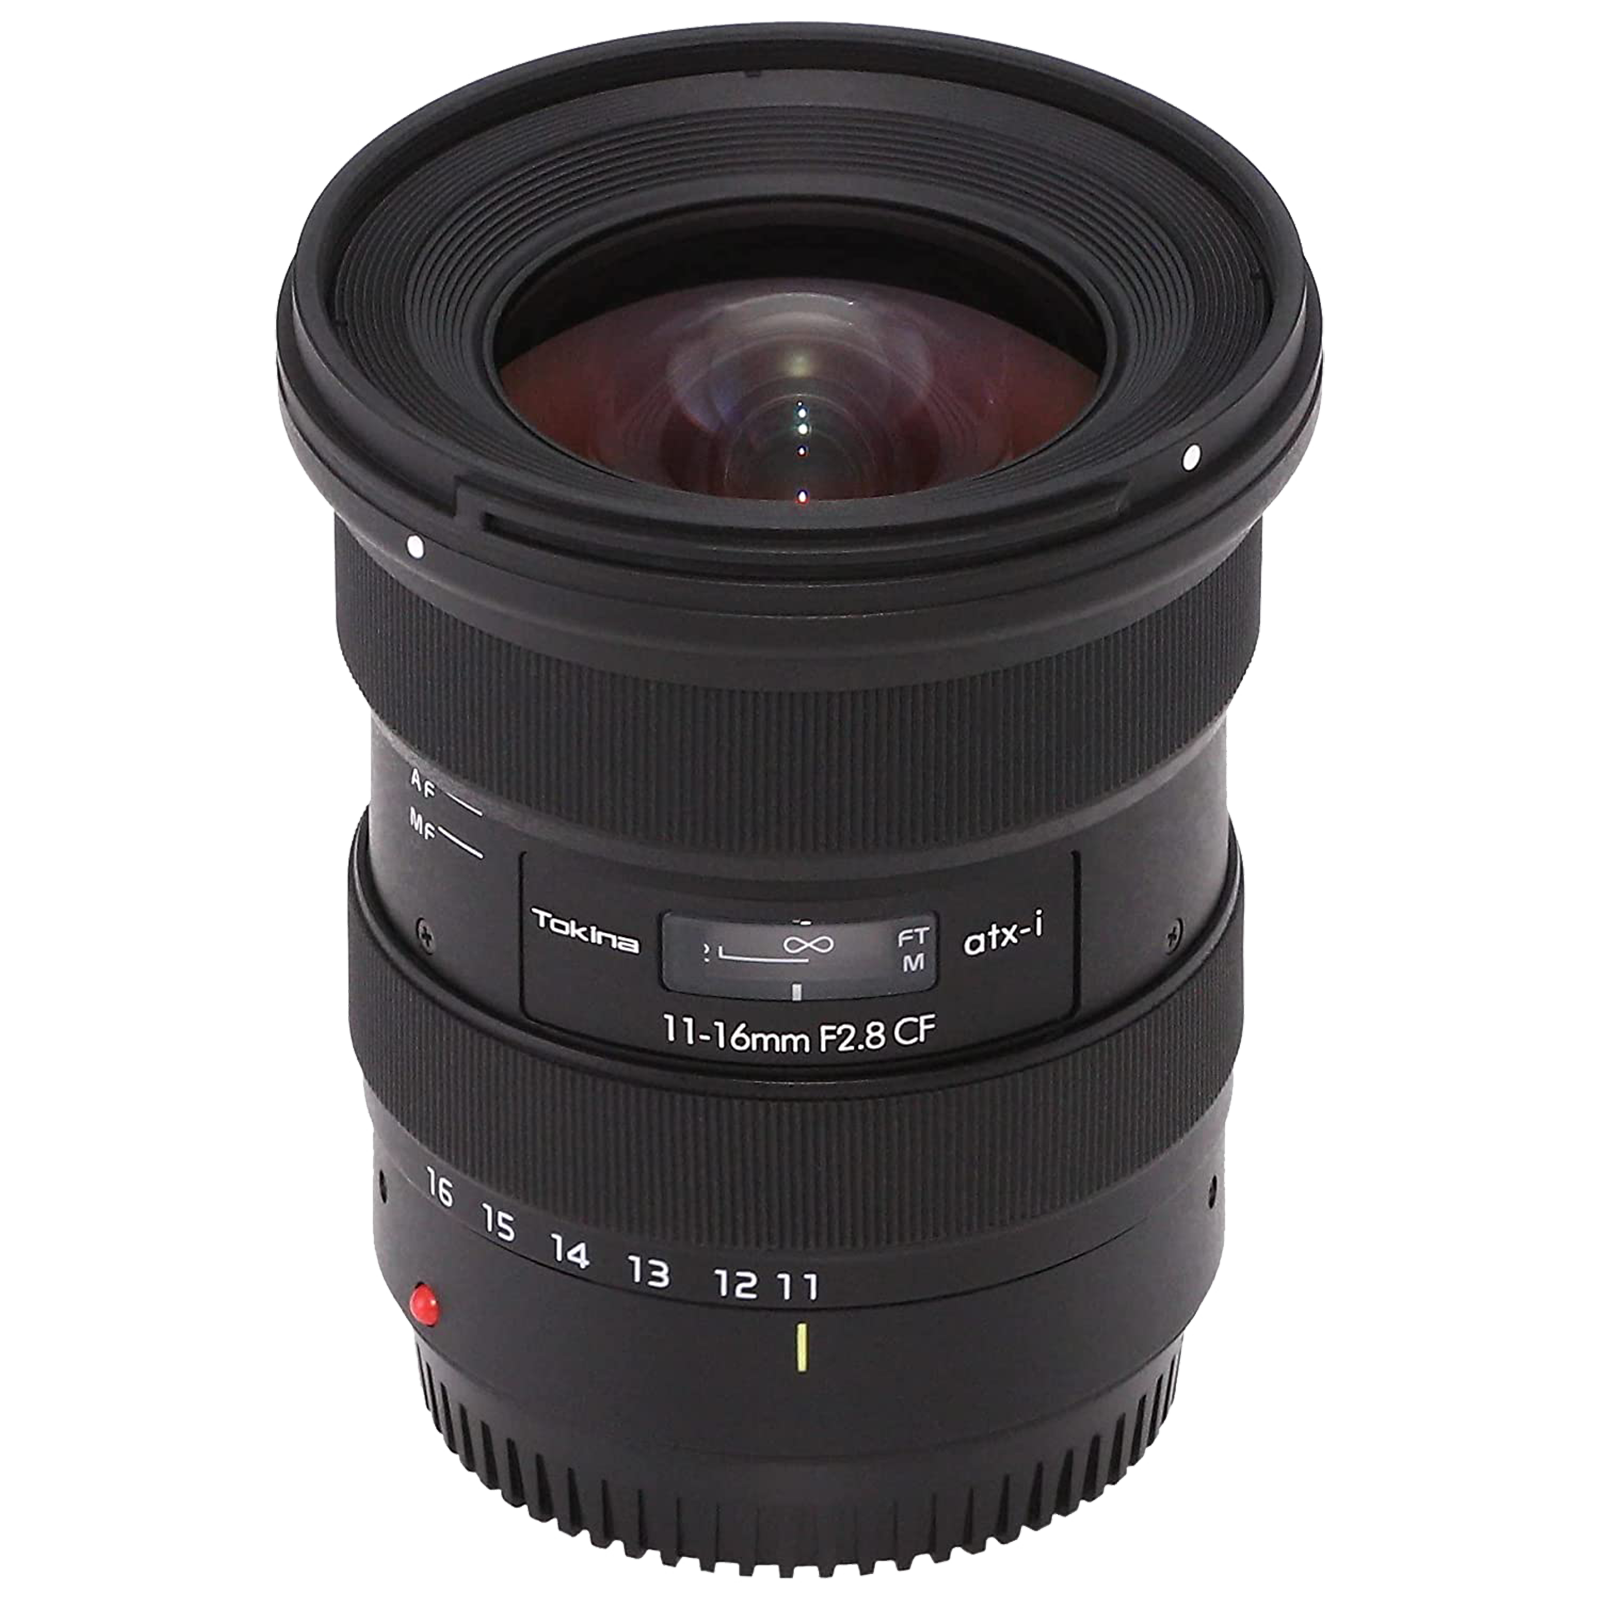 Tokina Atx-i 100mm f/32 - f/2.8 Telephoto Prime Lens for Canon EF Mount (One-touch Focus Clutch Mechanism)